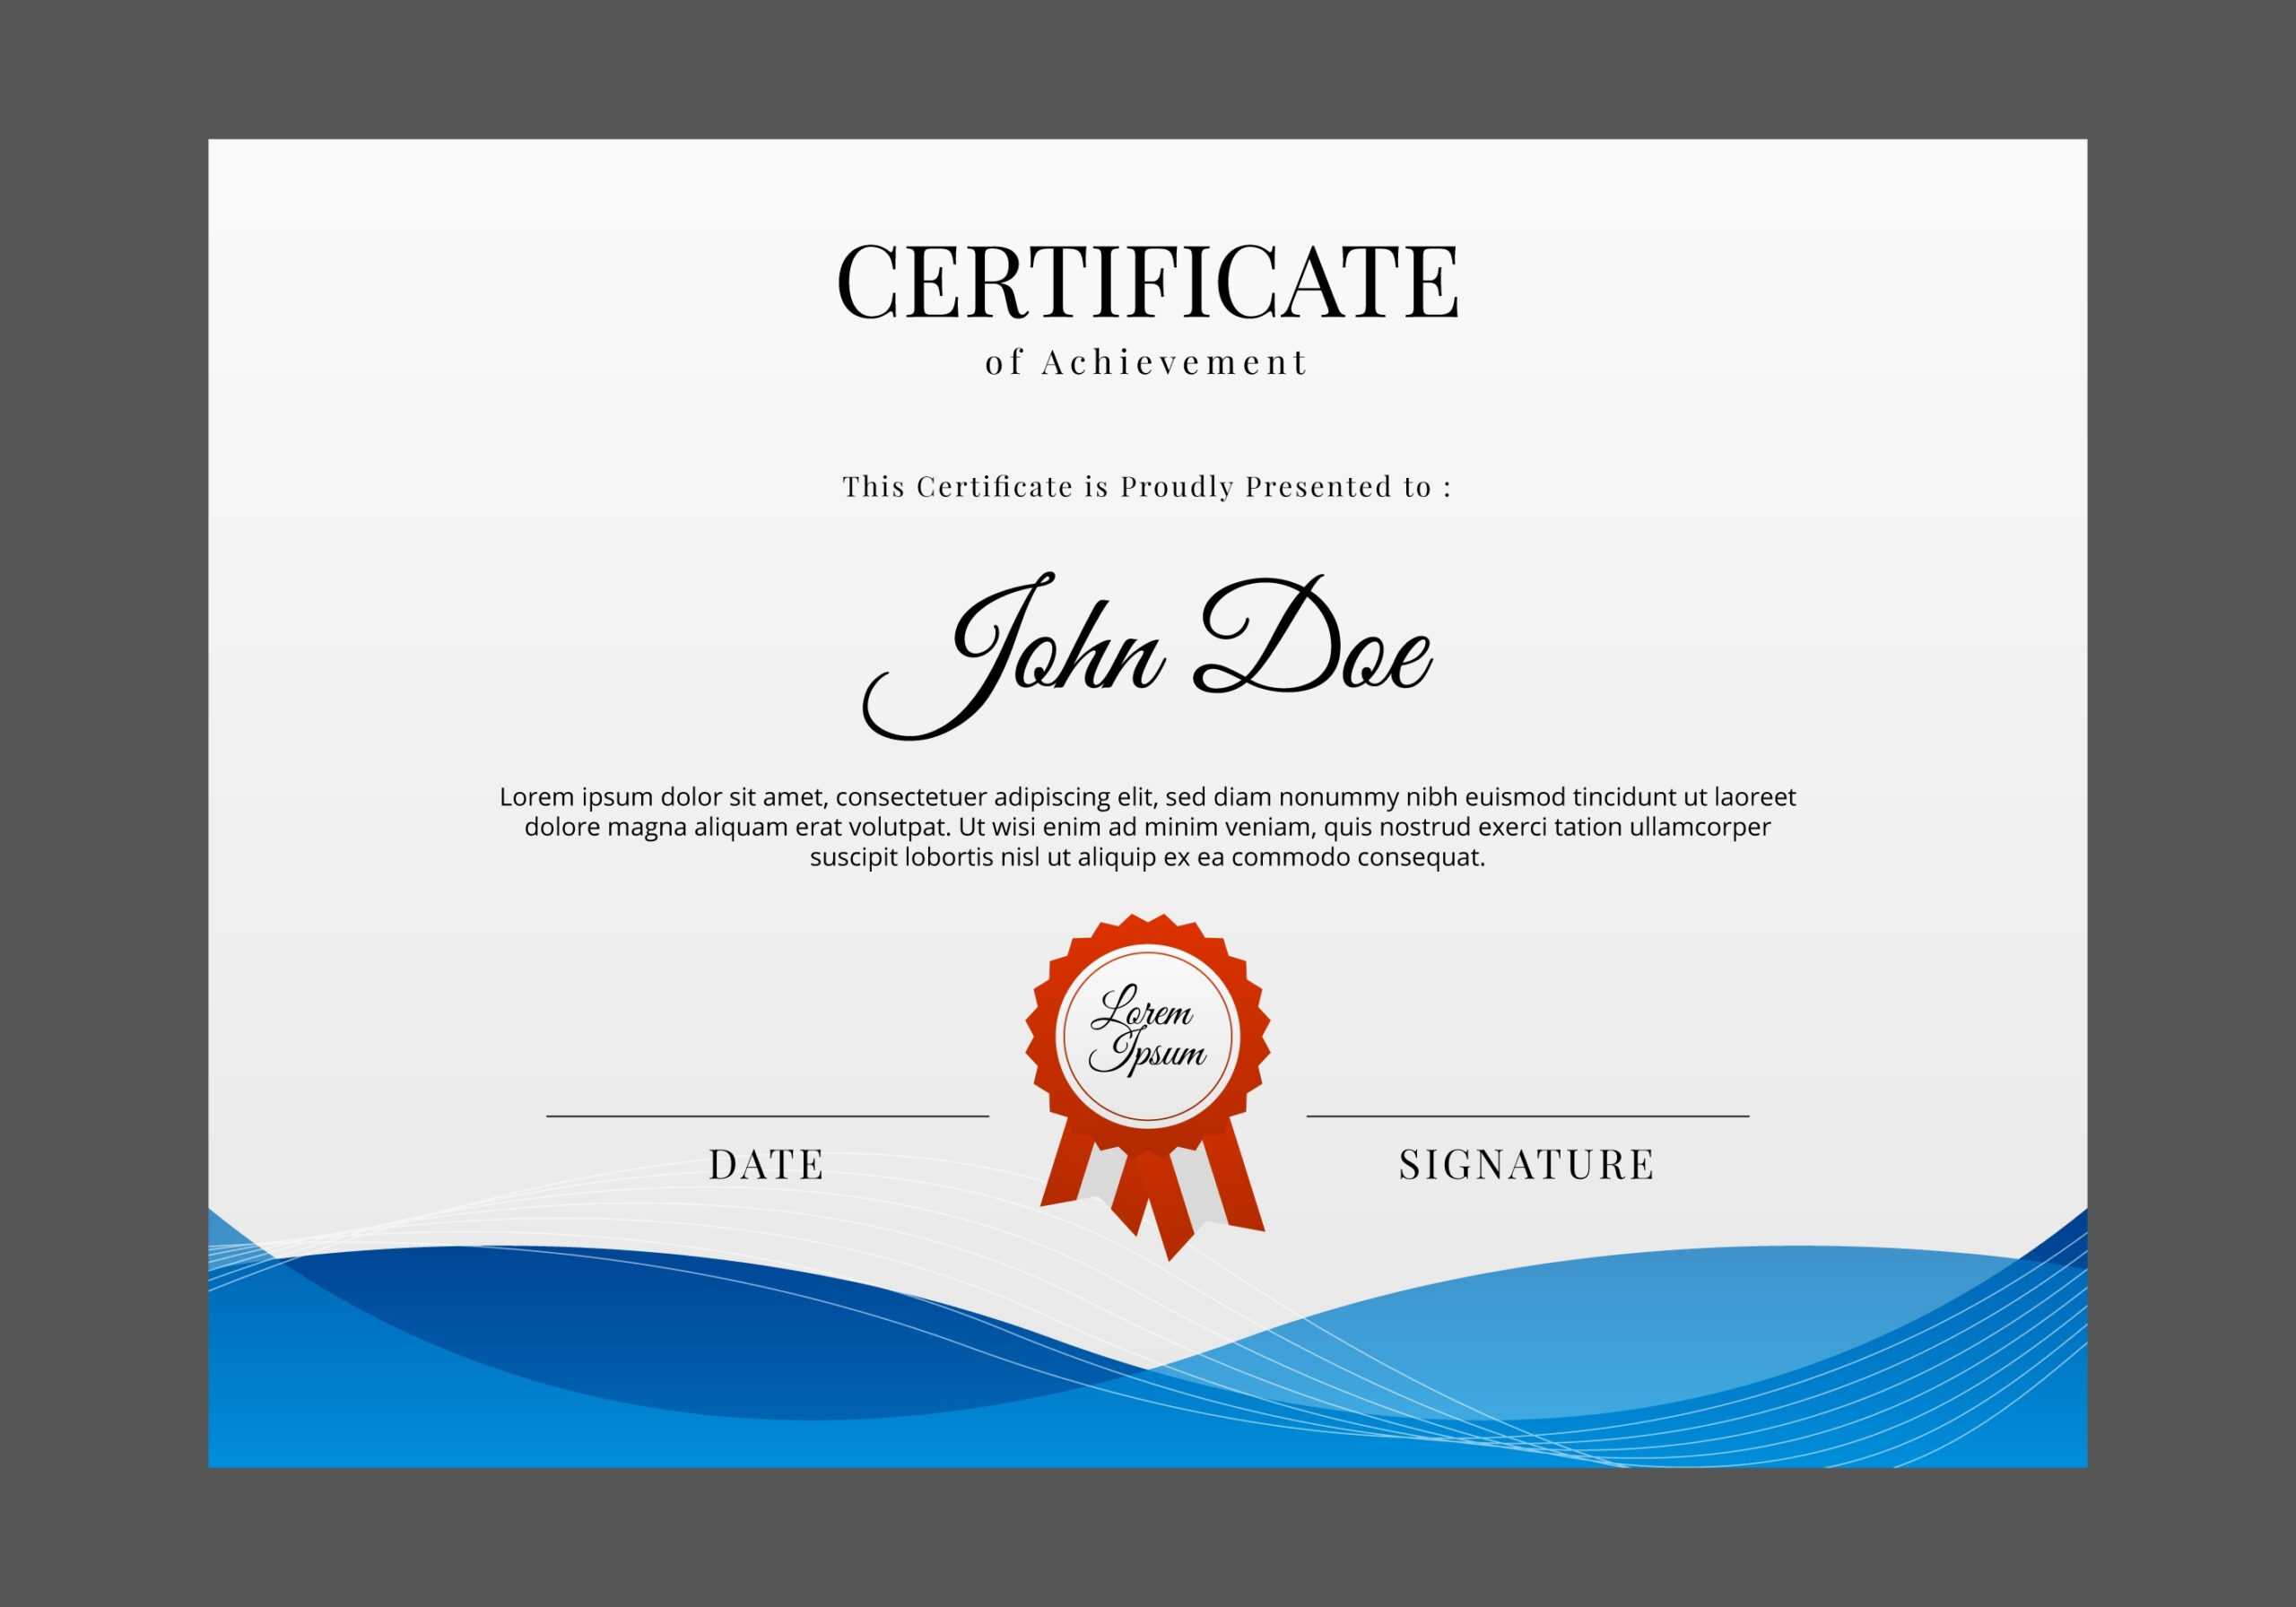 Certificate Design Free Vector Art - (10,170 Free Downloads Within Art Certificate Template Free